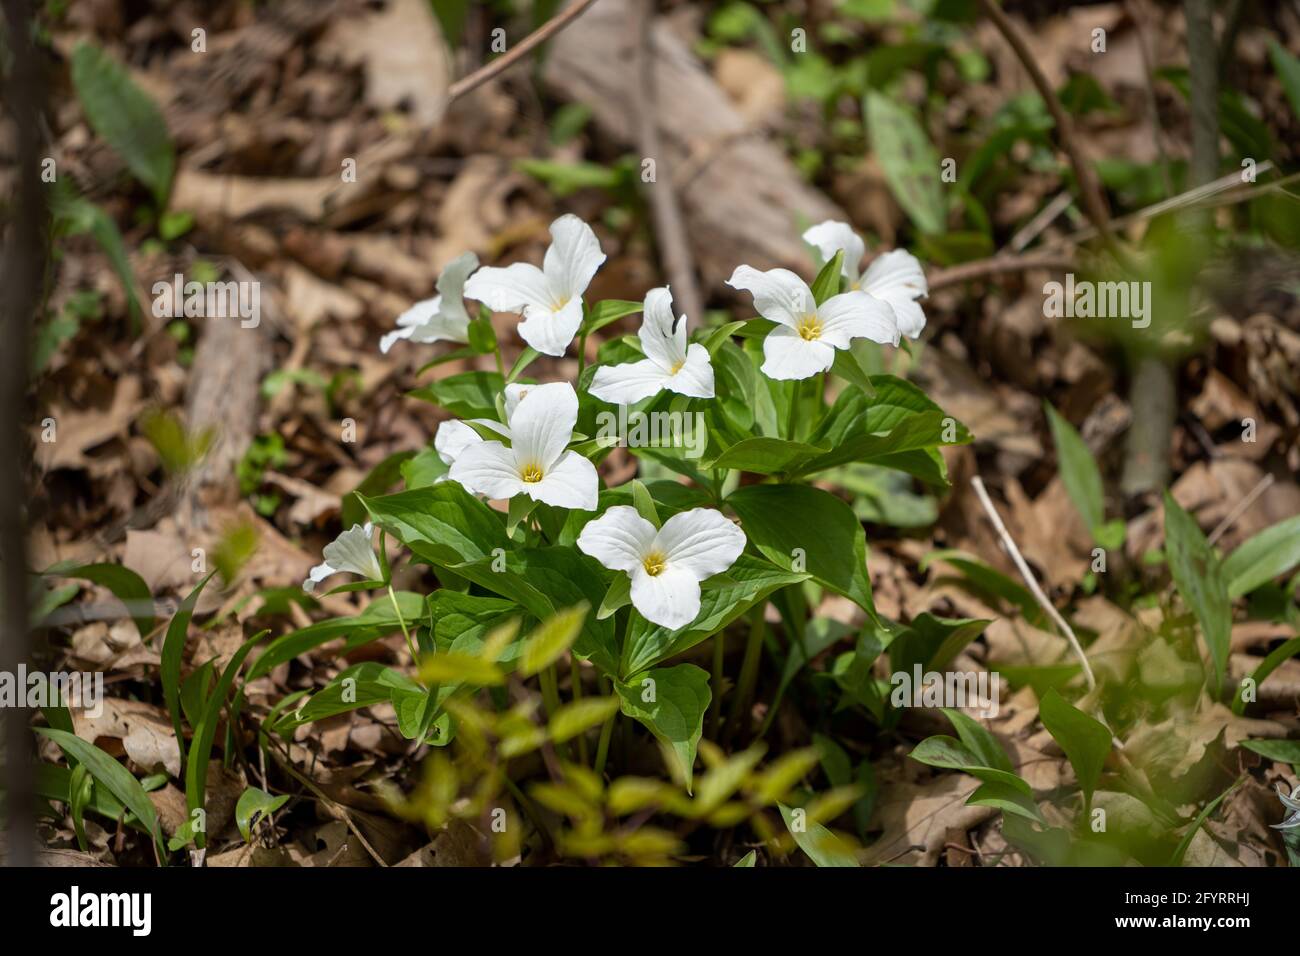 A beautiful white Nine trillium flowers in the forest under a bright sunlight in spring Stock Photo